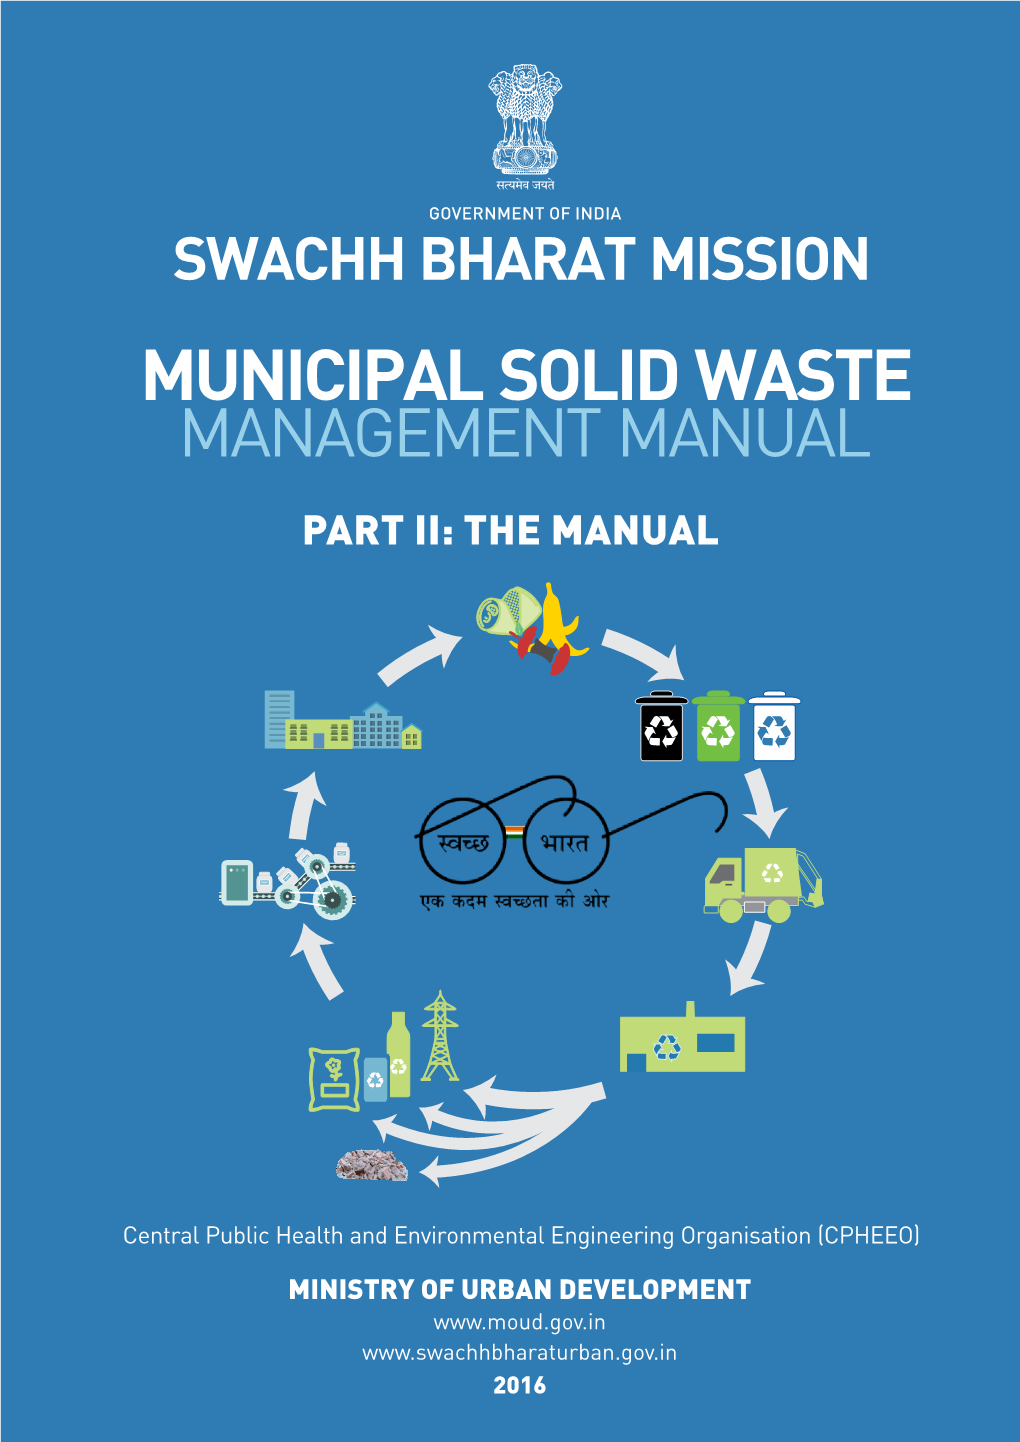 MUNICIPAL SOLID WASTE MANAGEMENT MANUAL Part II: the Manual